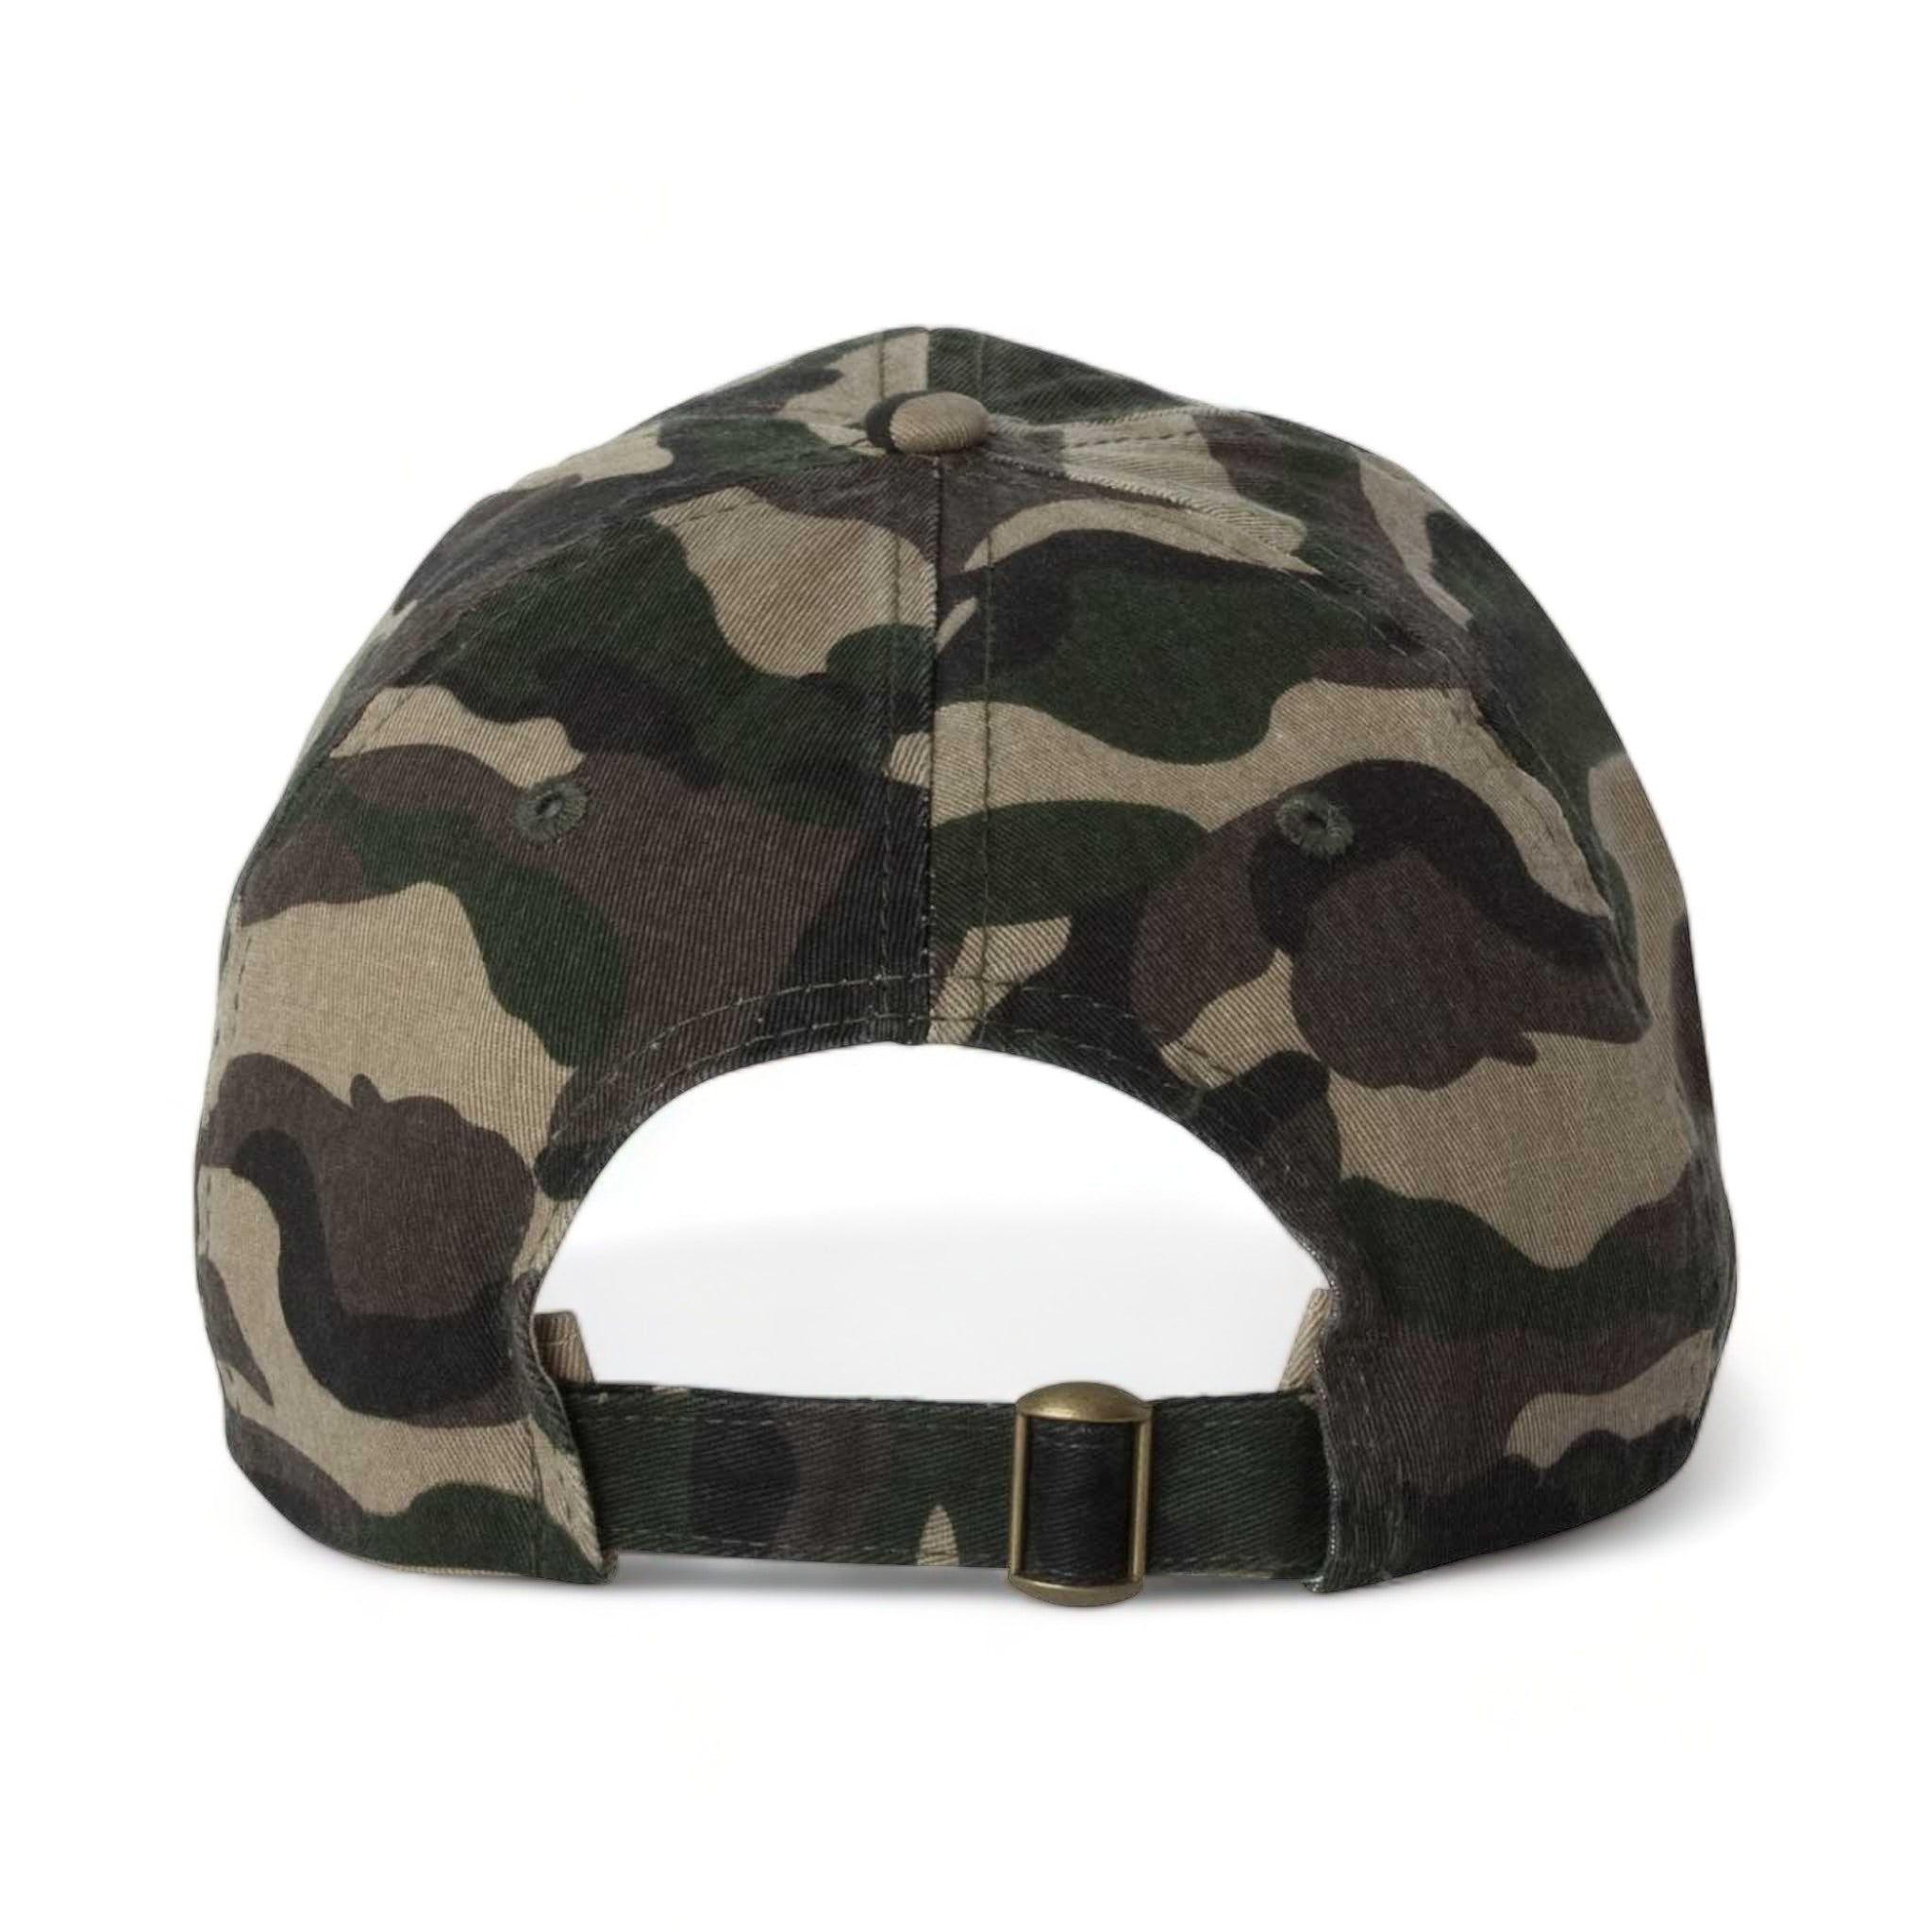 Back view of Valucap VC300A custom hat in green camo